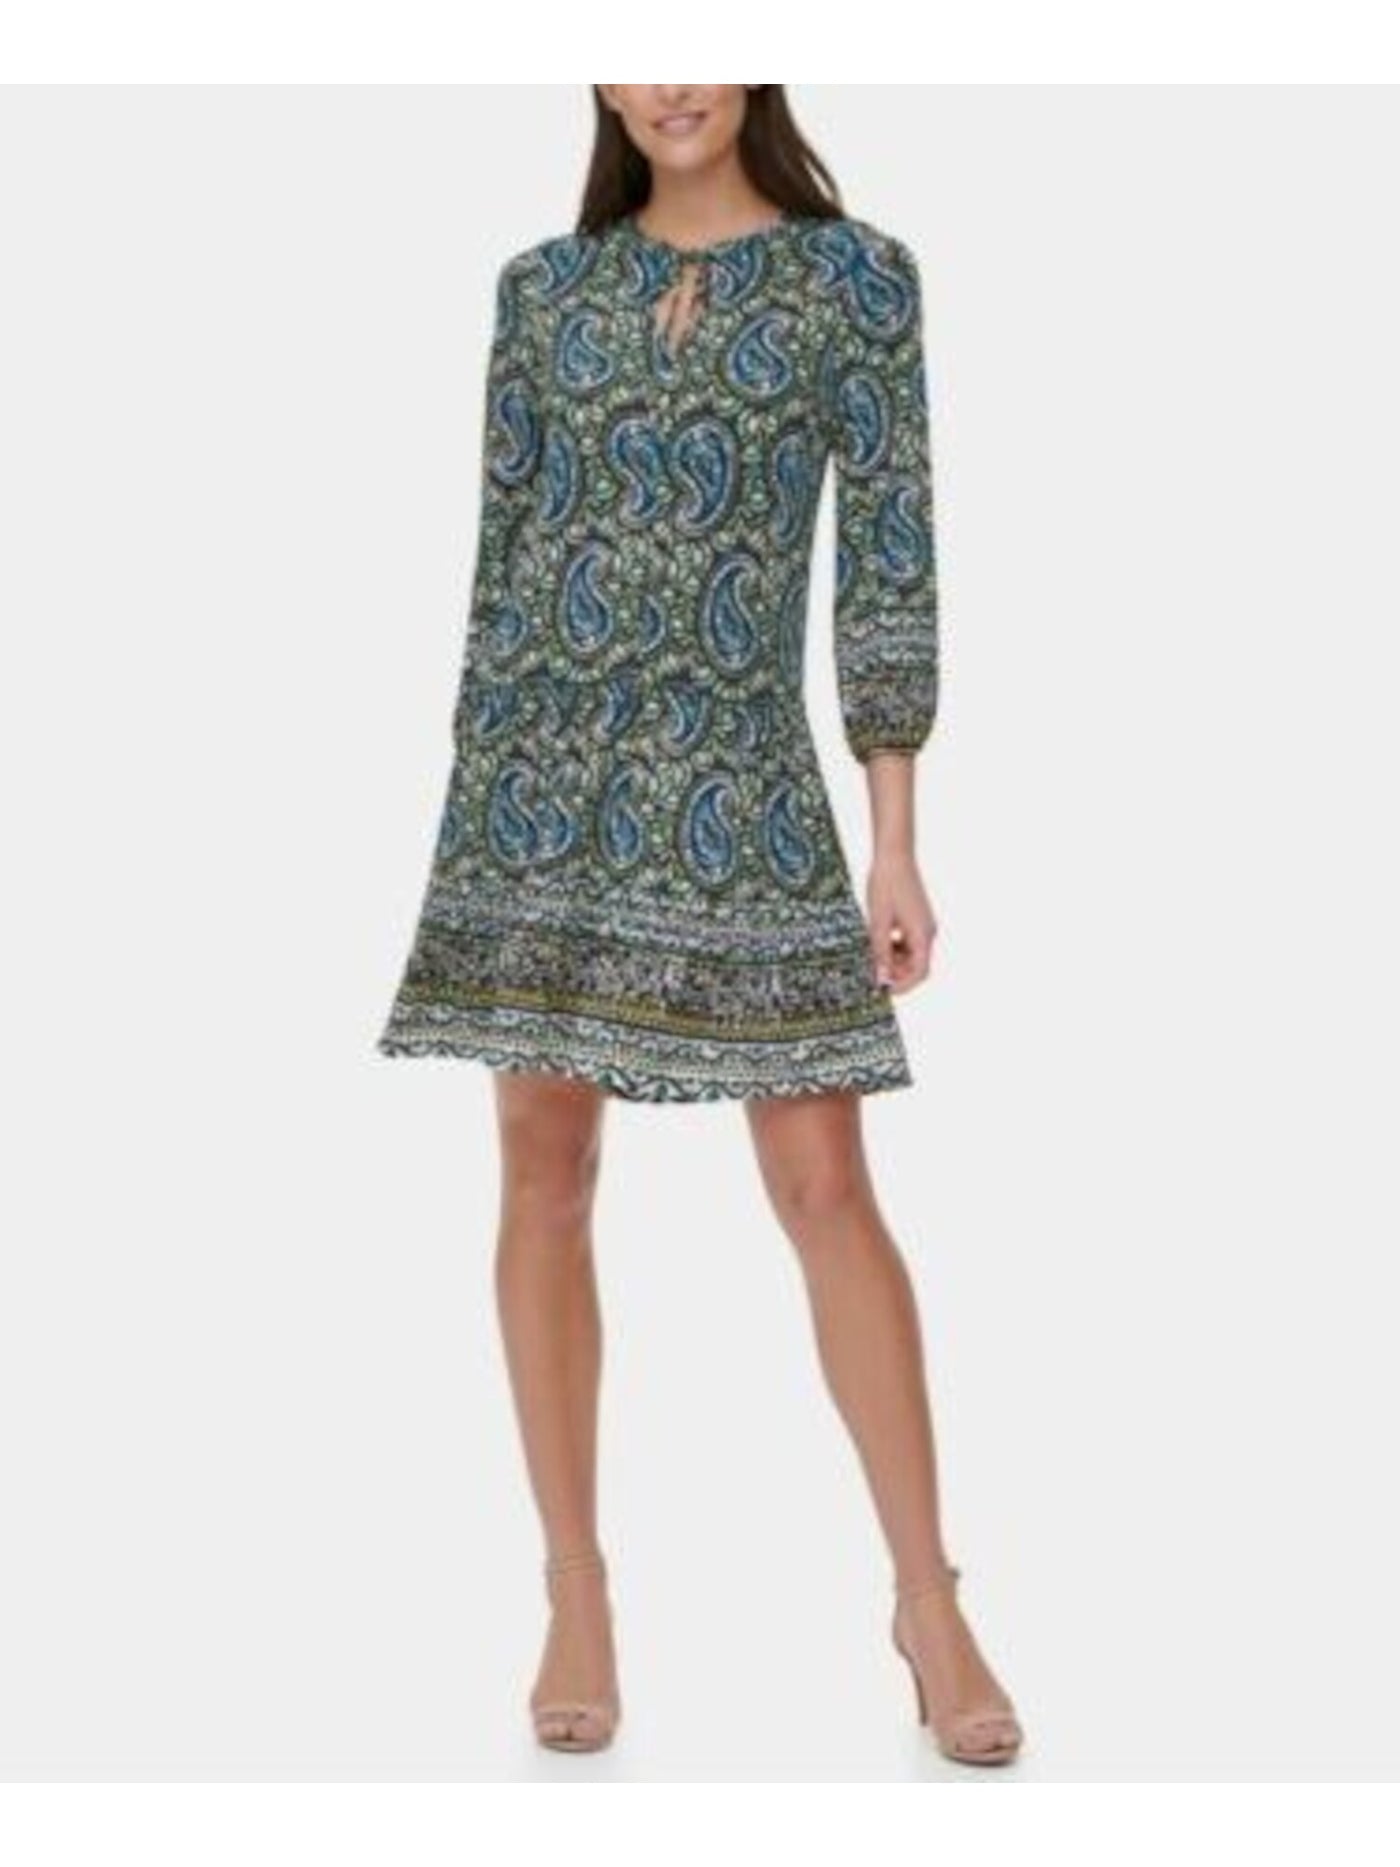 TOMMY HILFIGER Womens Green Stretch Paisley 3/4 Sleeve Tie Neck Above The Knee Wear To Work Fit + Flare Dress Plus 20W